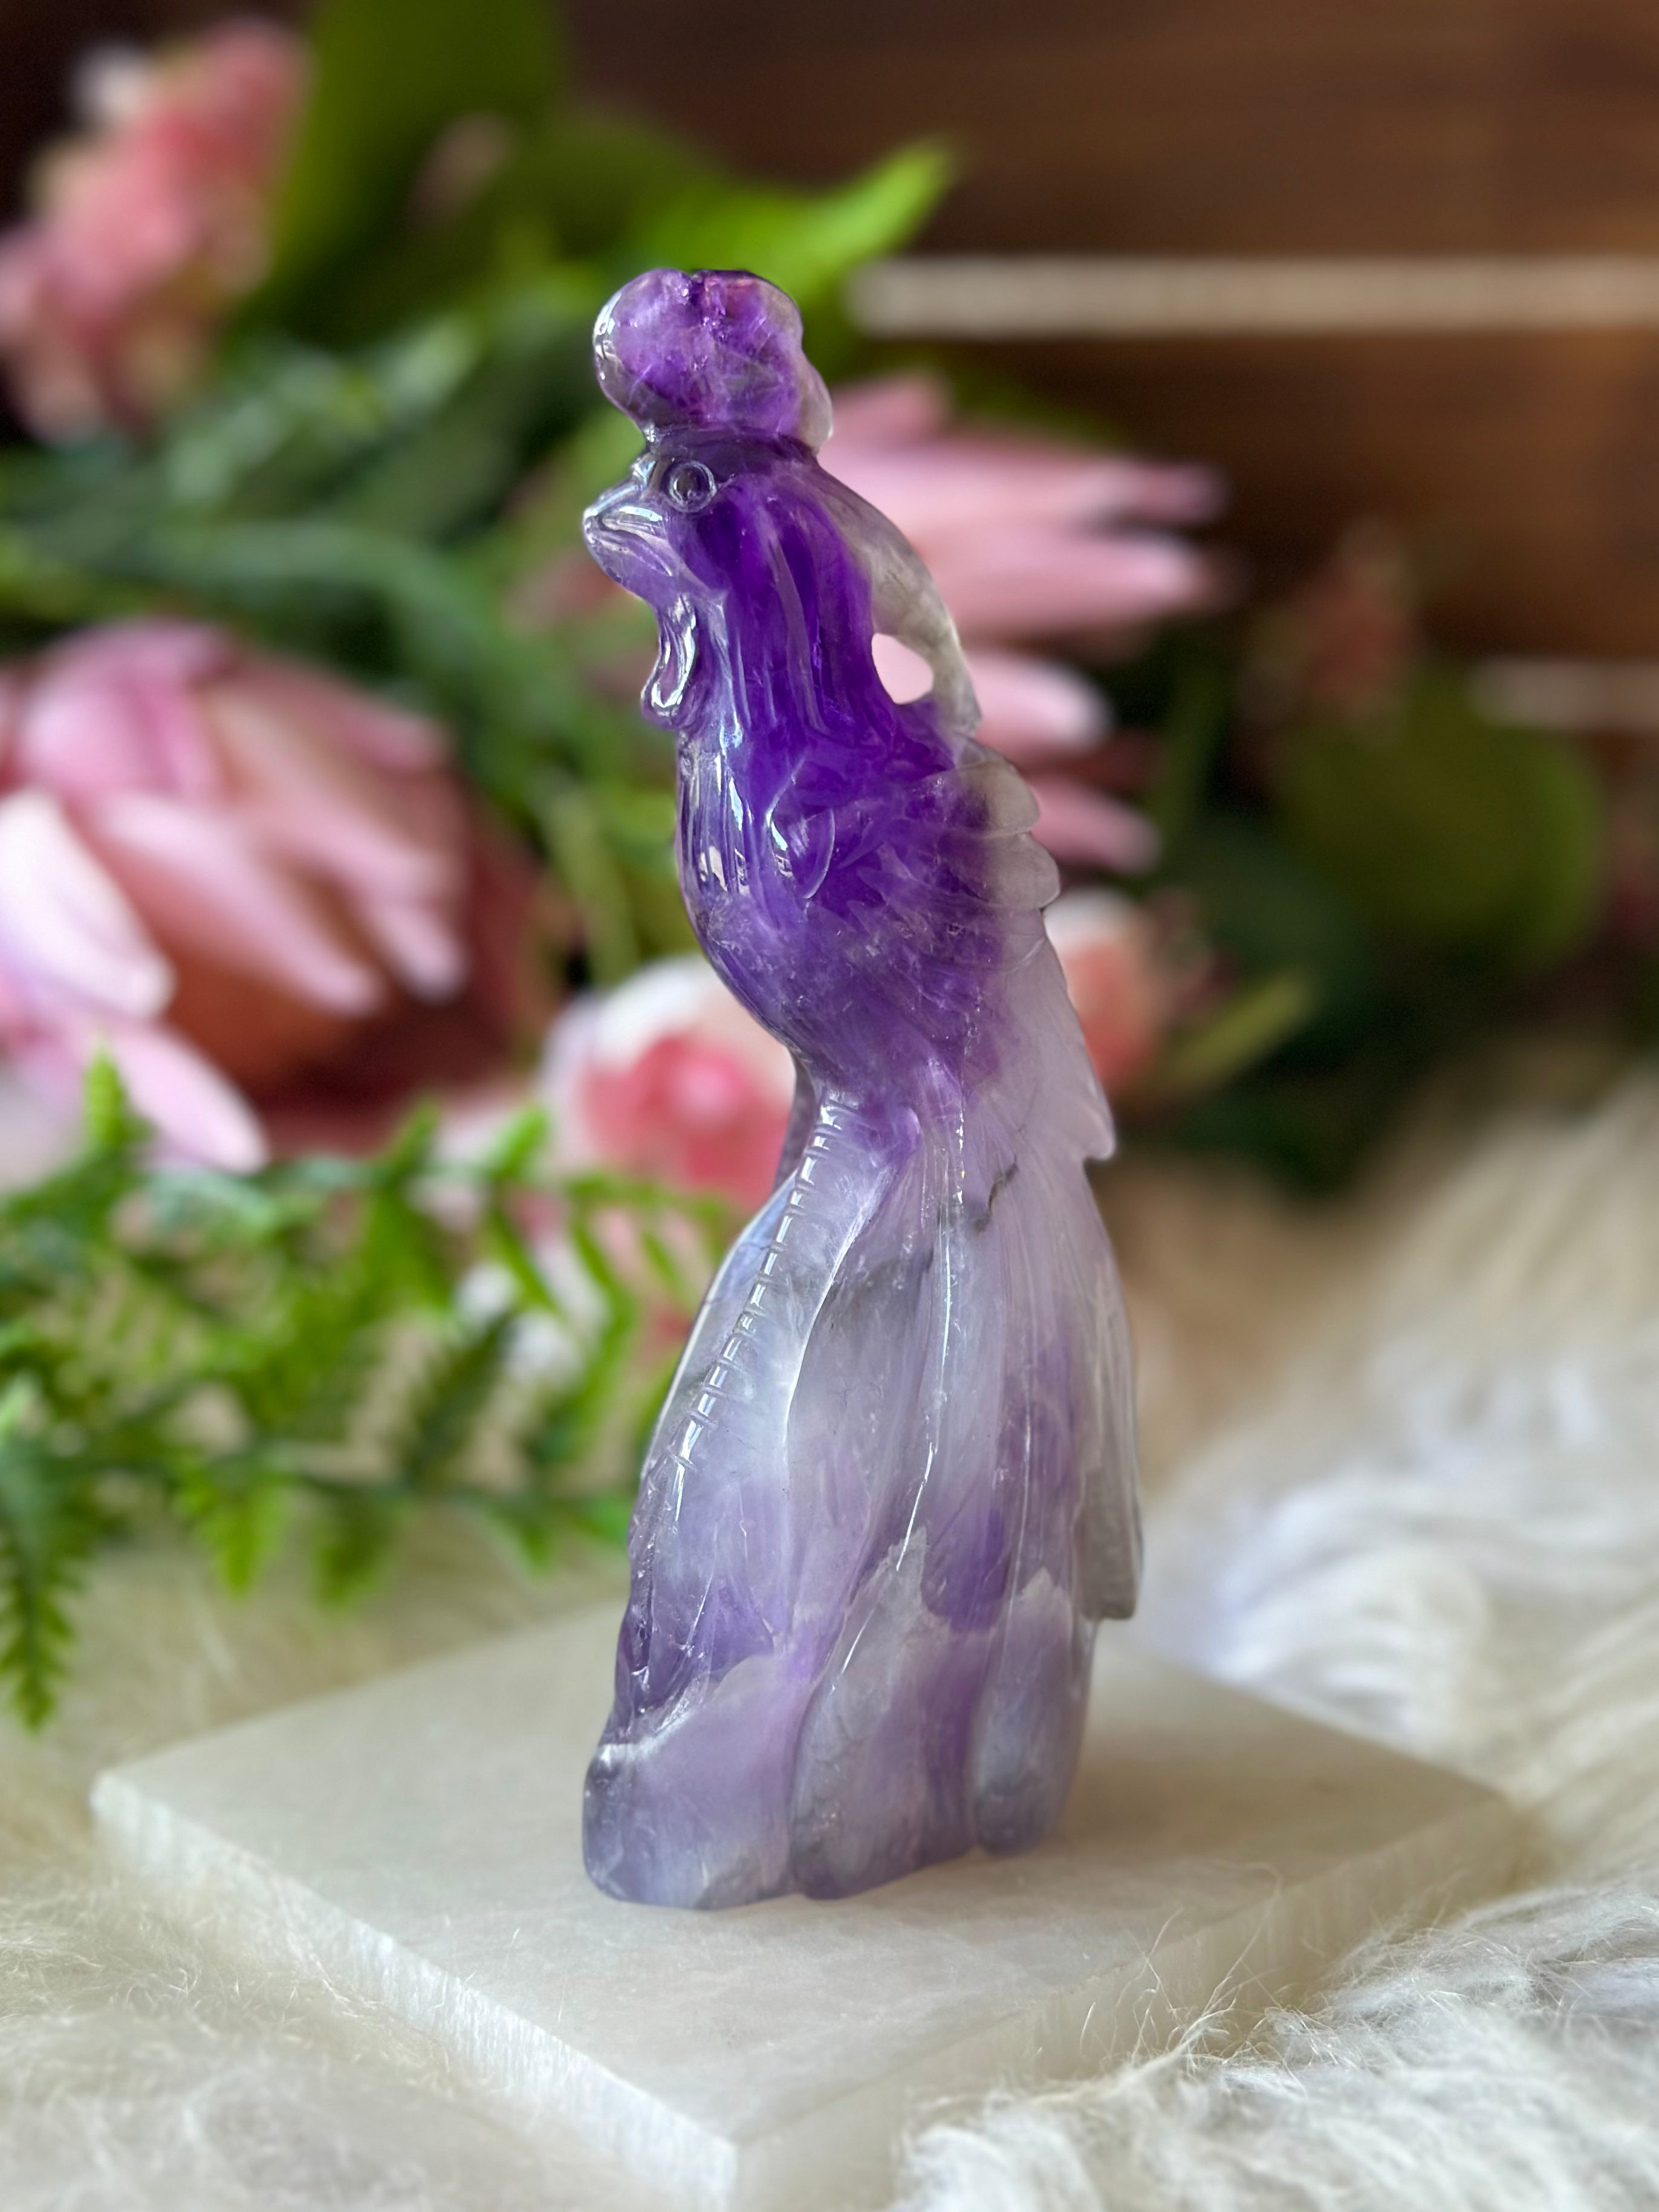 Amethyst Peacock Carving - Muse Crystals & Mystical Gifts